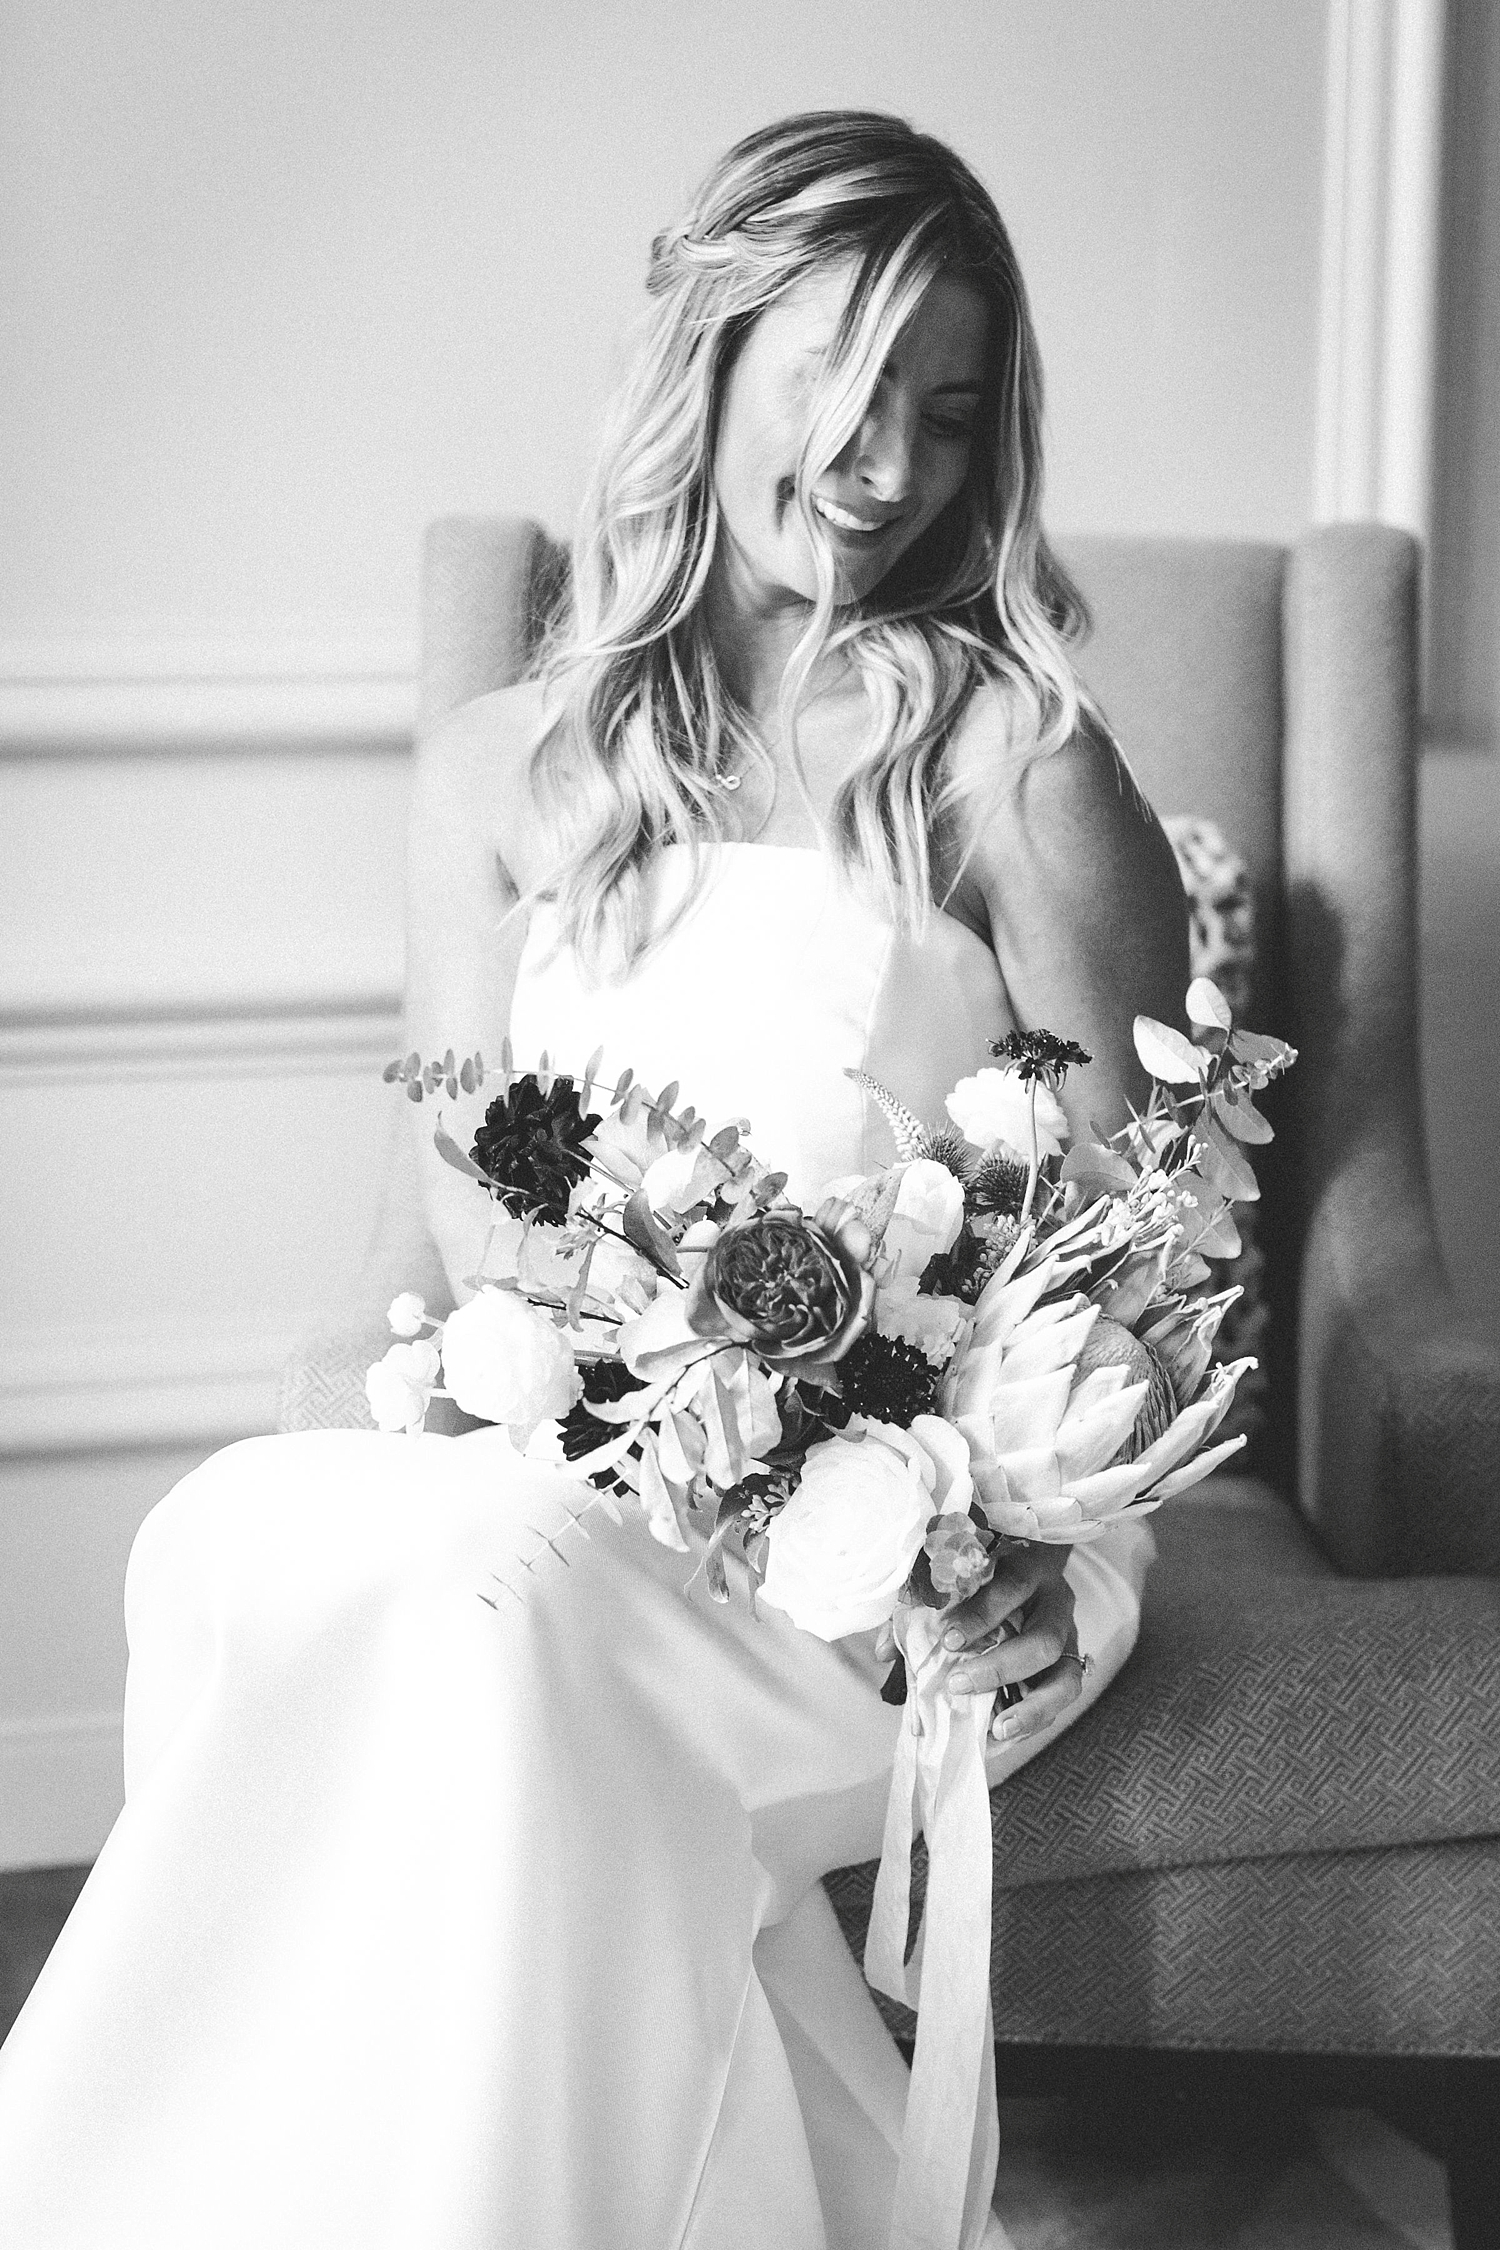 Black and white photo of a bride on a chair holding a bouquet